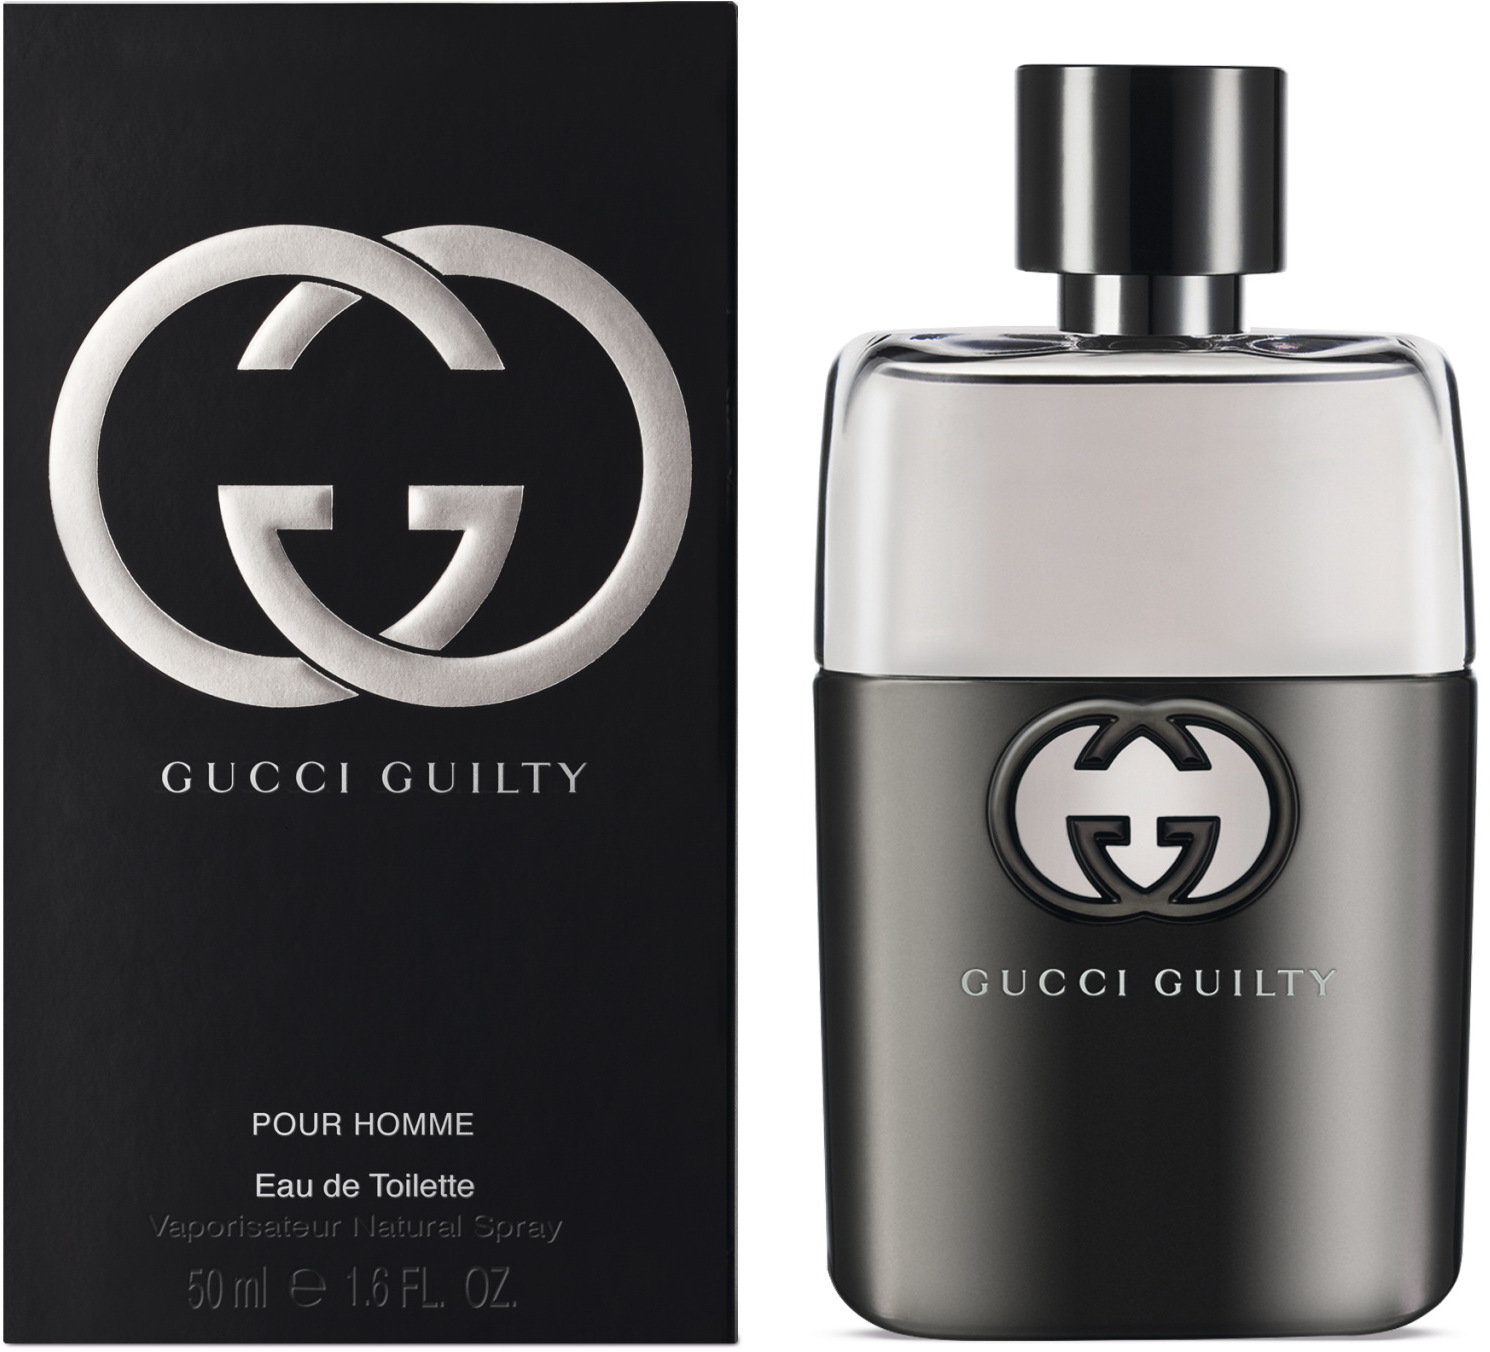 guilty guilty cologne